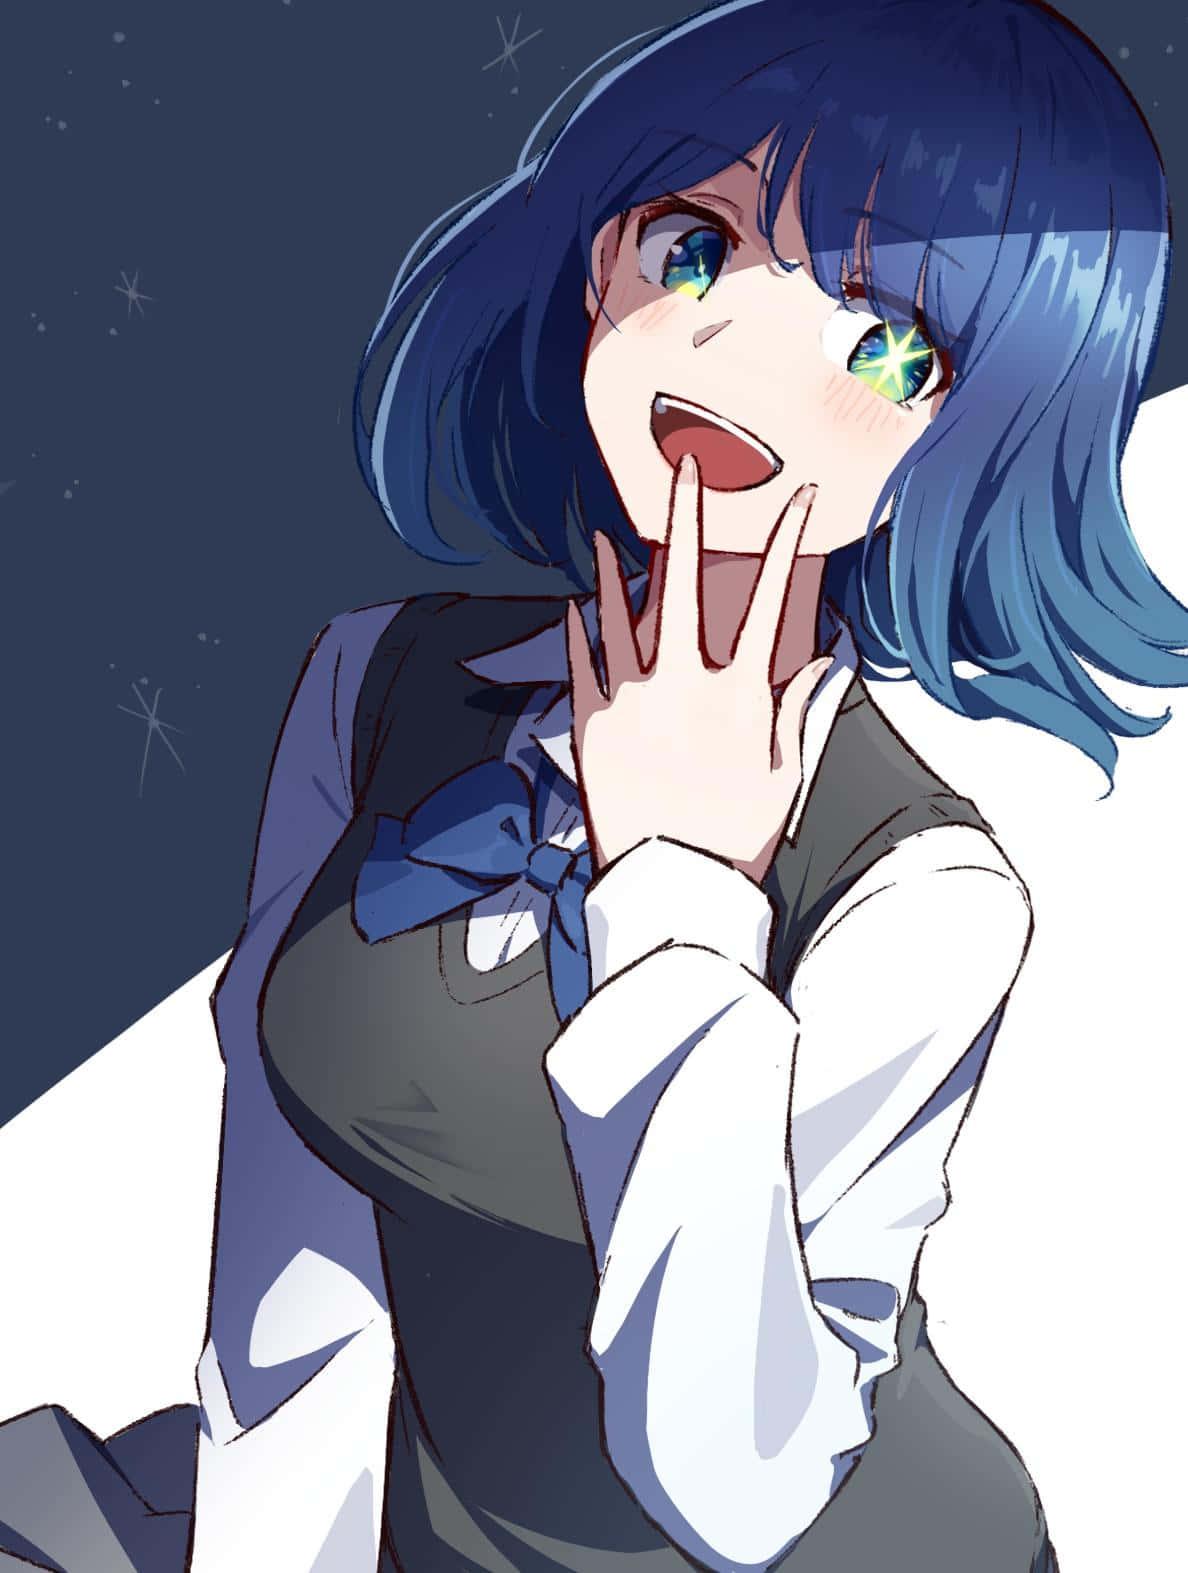 Blue Haired Anime Girl Surprised Expression Wallpaper